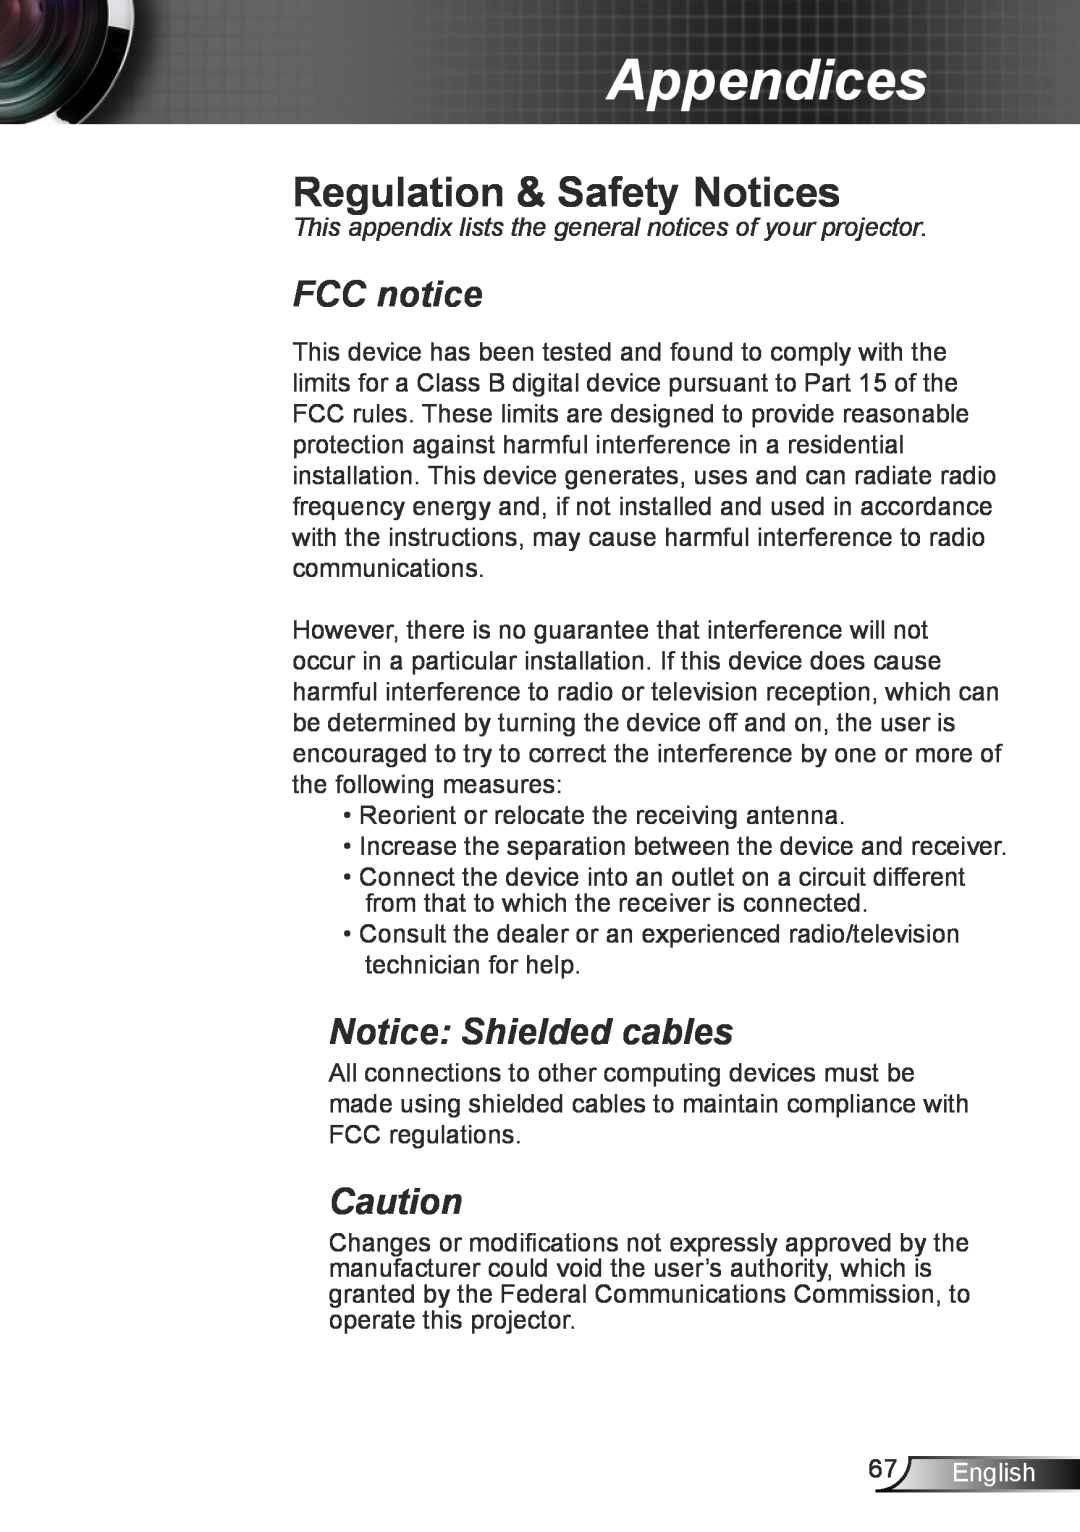 Optoma Technology TW6153D, TW615GOV Regulation & Safety Notices, FCC notice, Notice Shielded cables, English, Appendices 